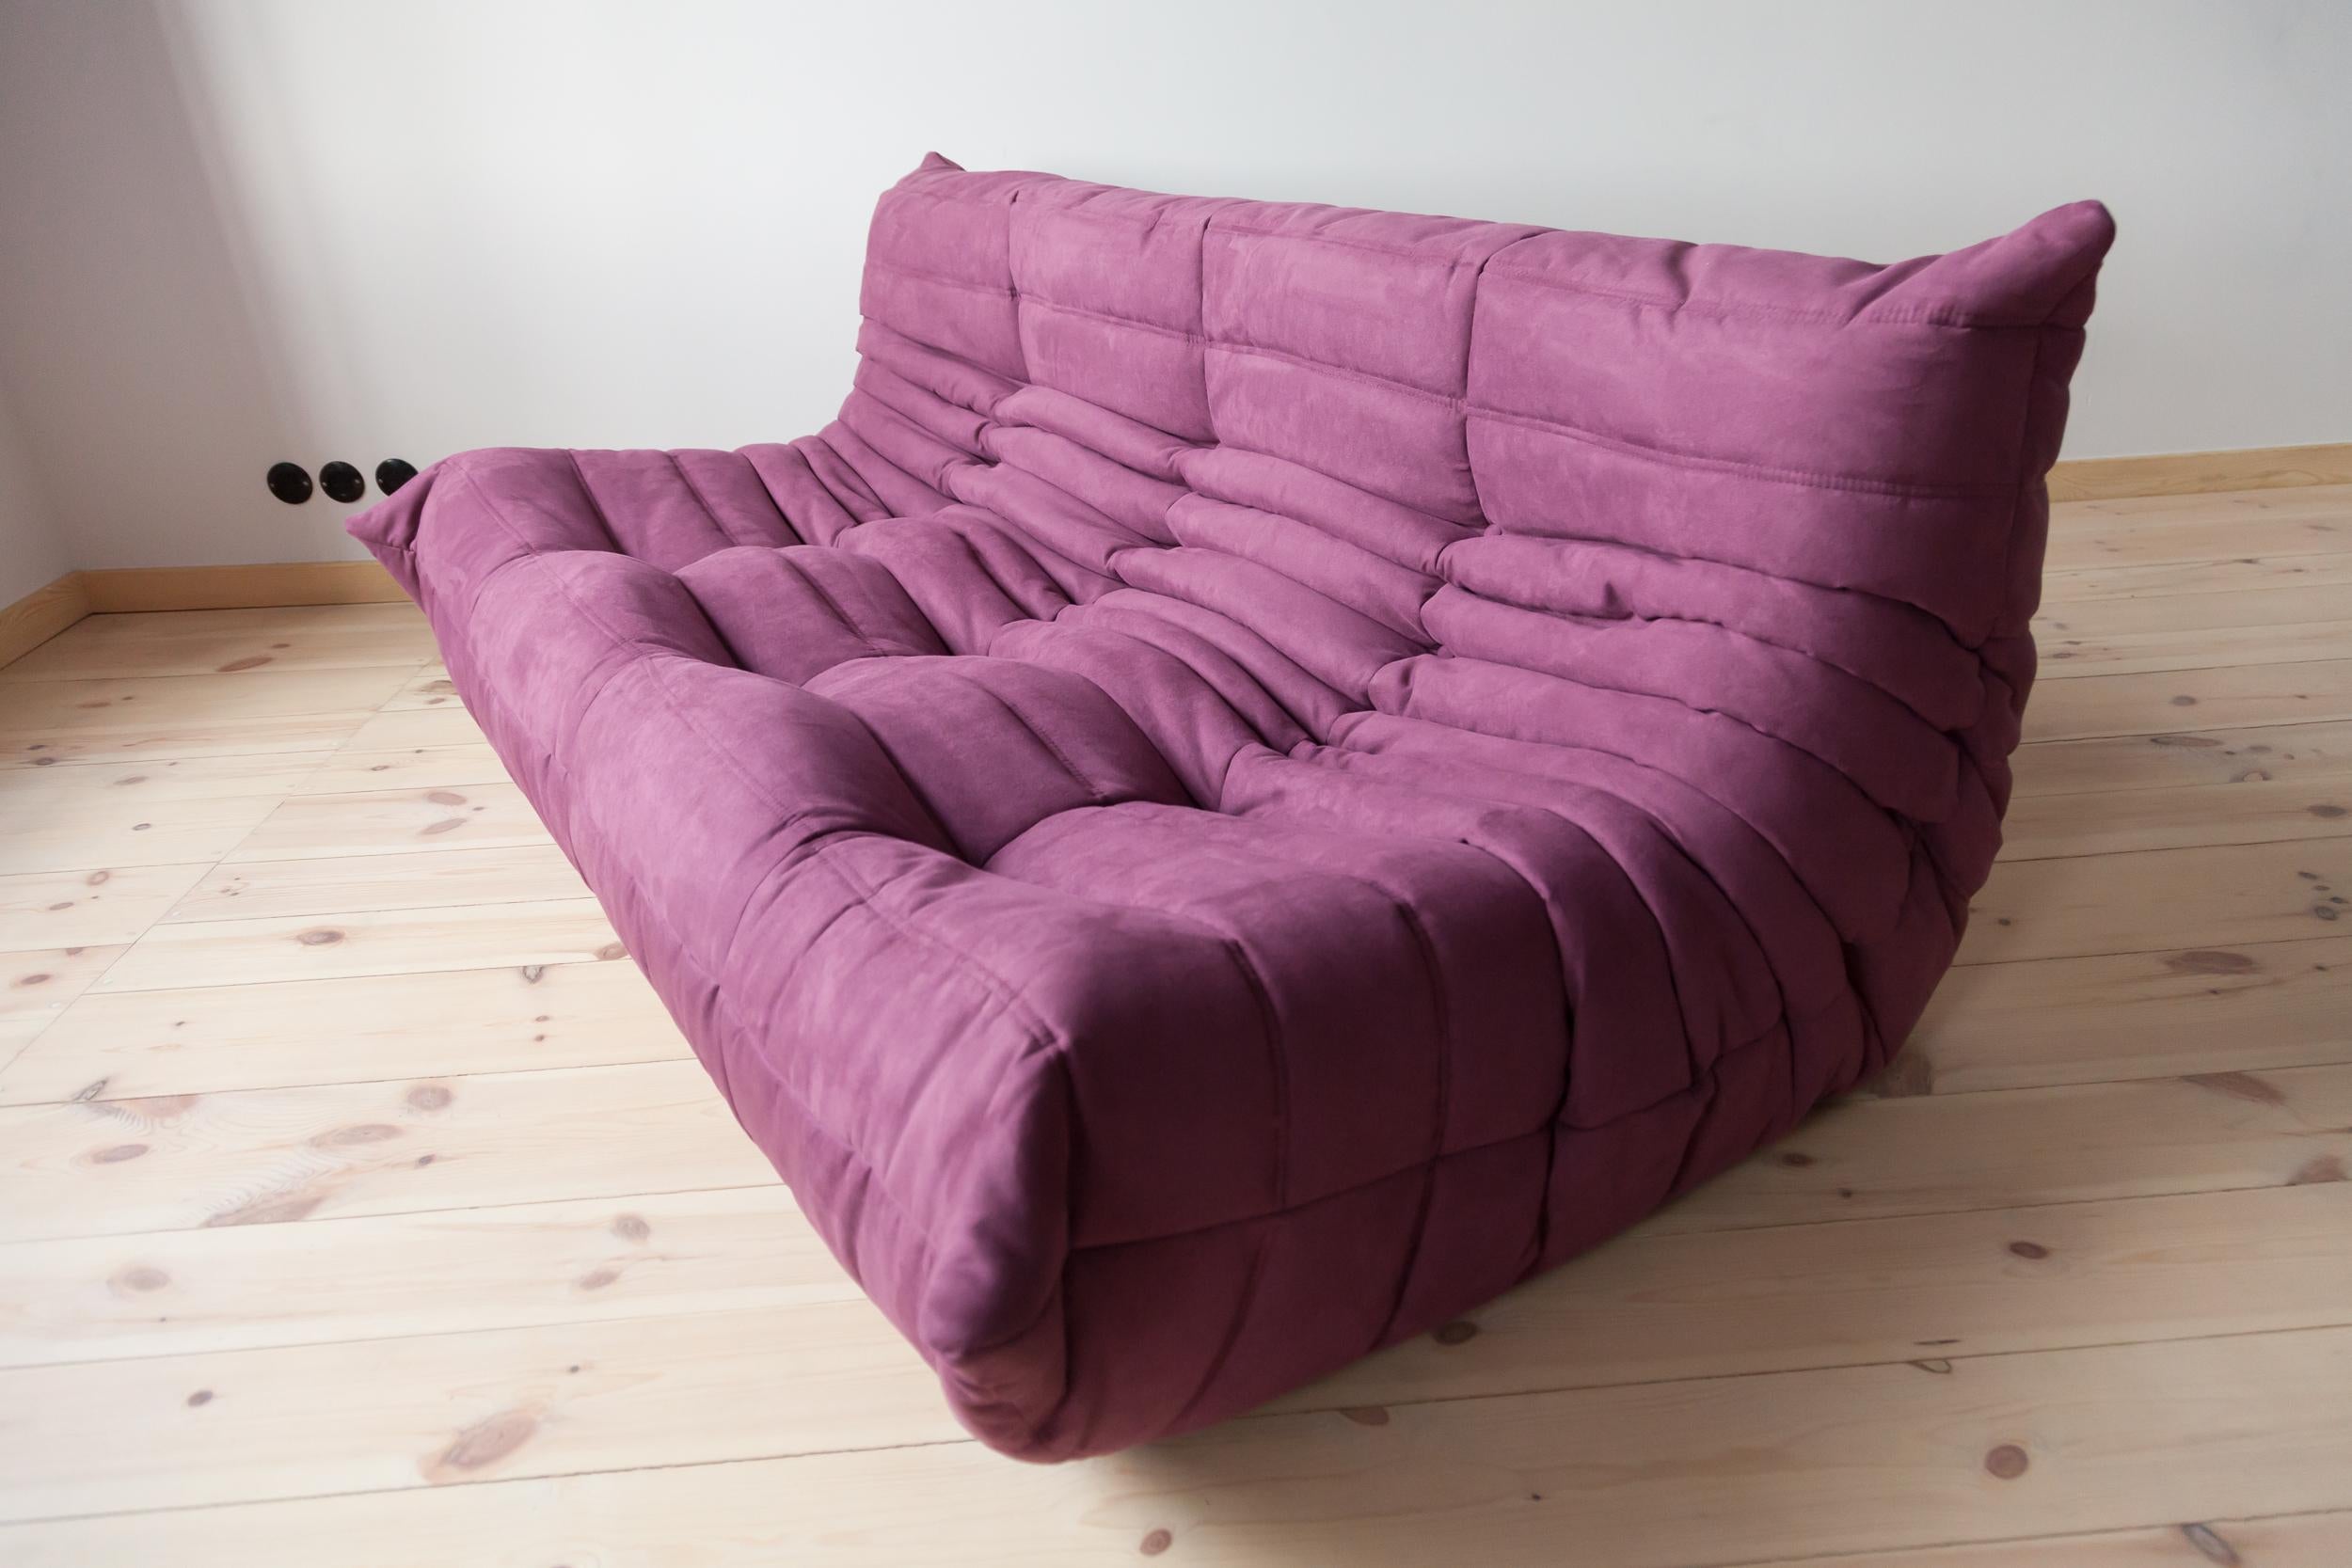 This Togo three-seat sofa was designed by Michel Ducaroy in 1973 and was manufactured by Ligne Roset in France. It has been reupholstered in new aubergine/purple microfibre (70 x 172 x 102 cm). It has the original Ligne Roset logo and genuine Ligne